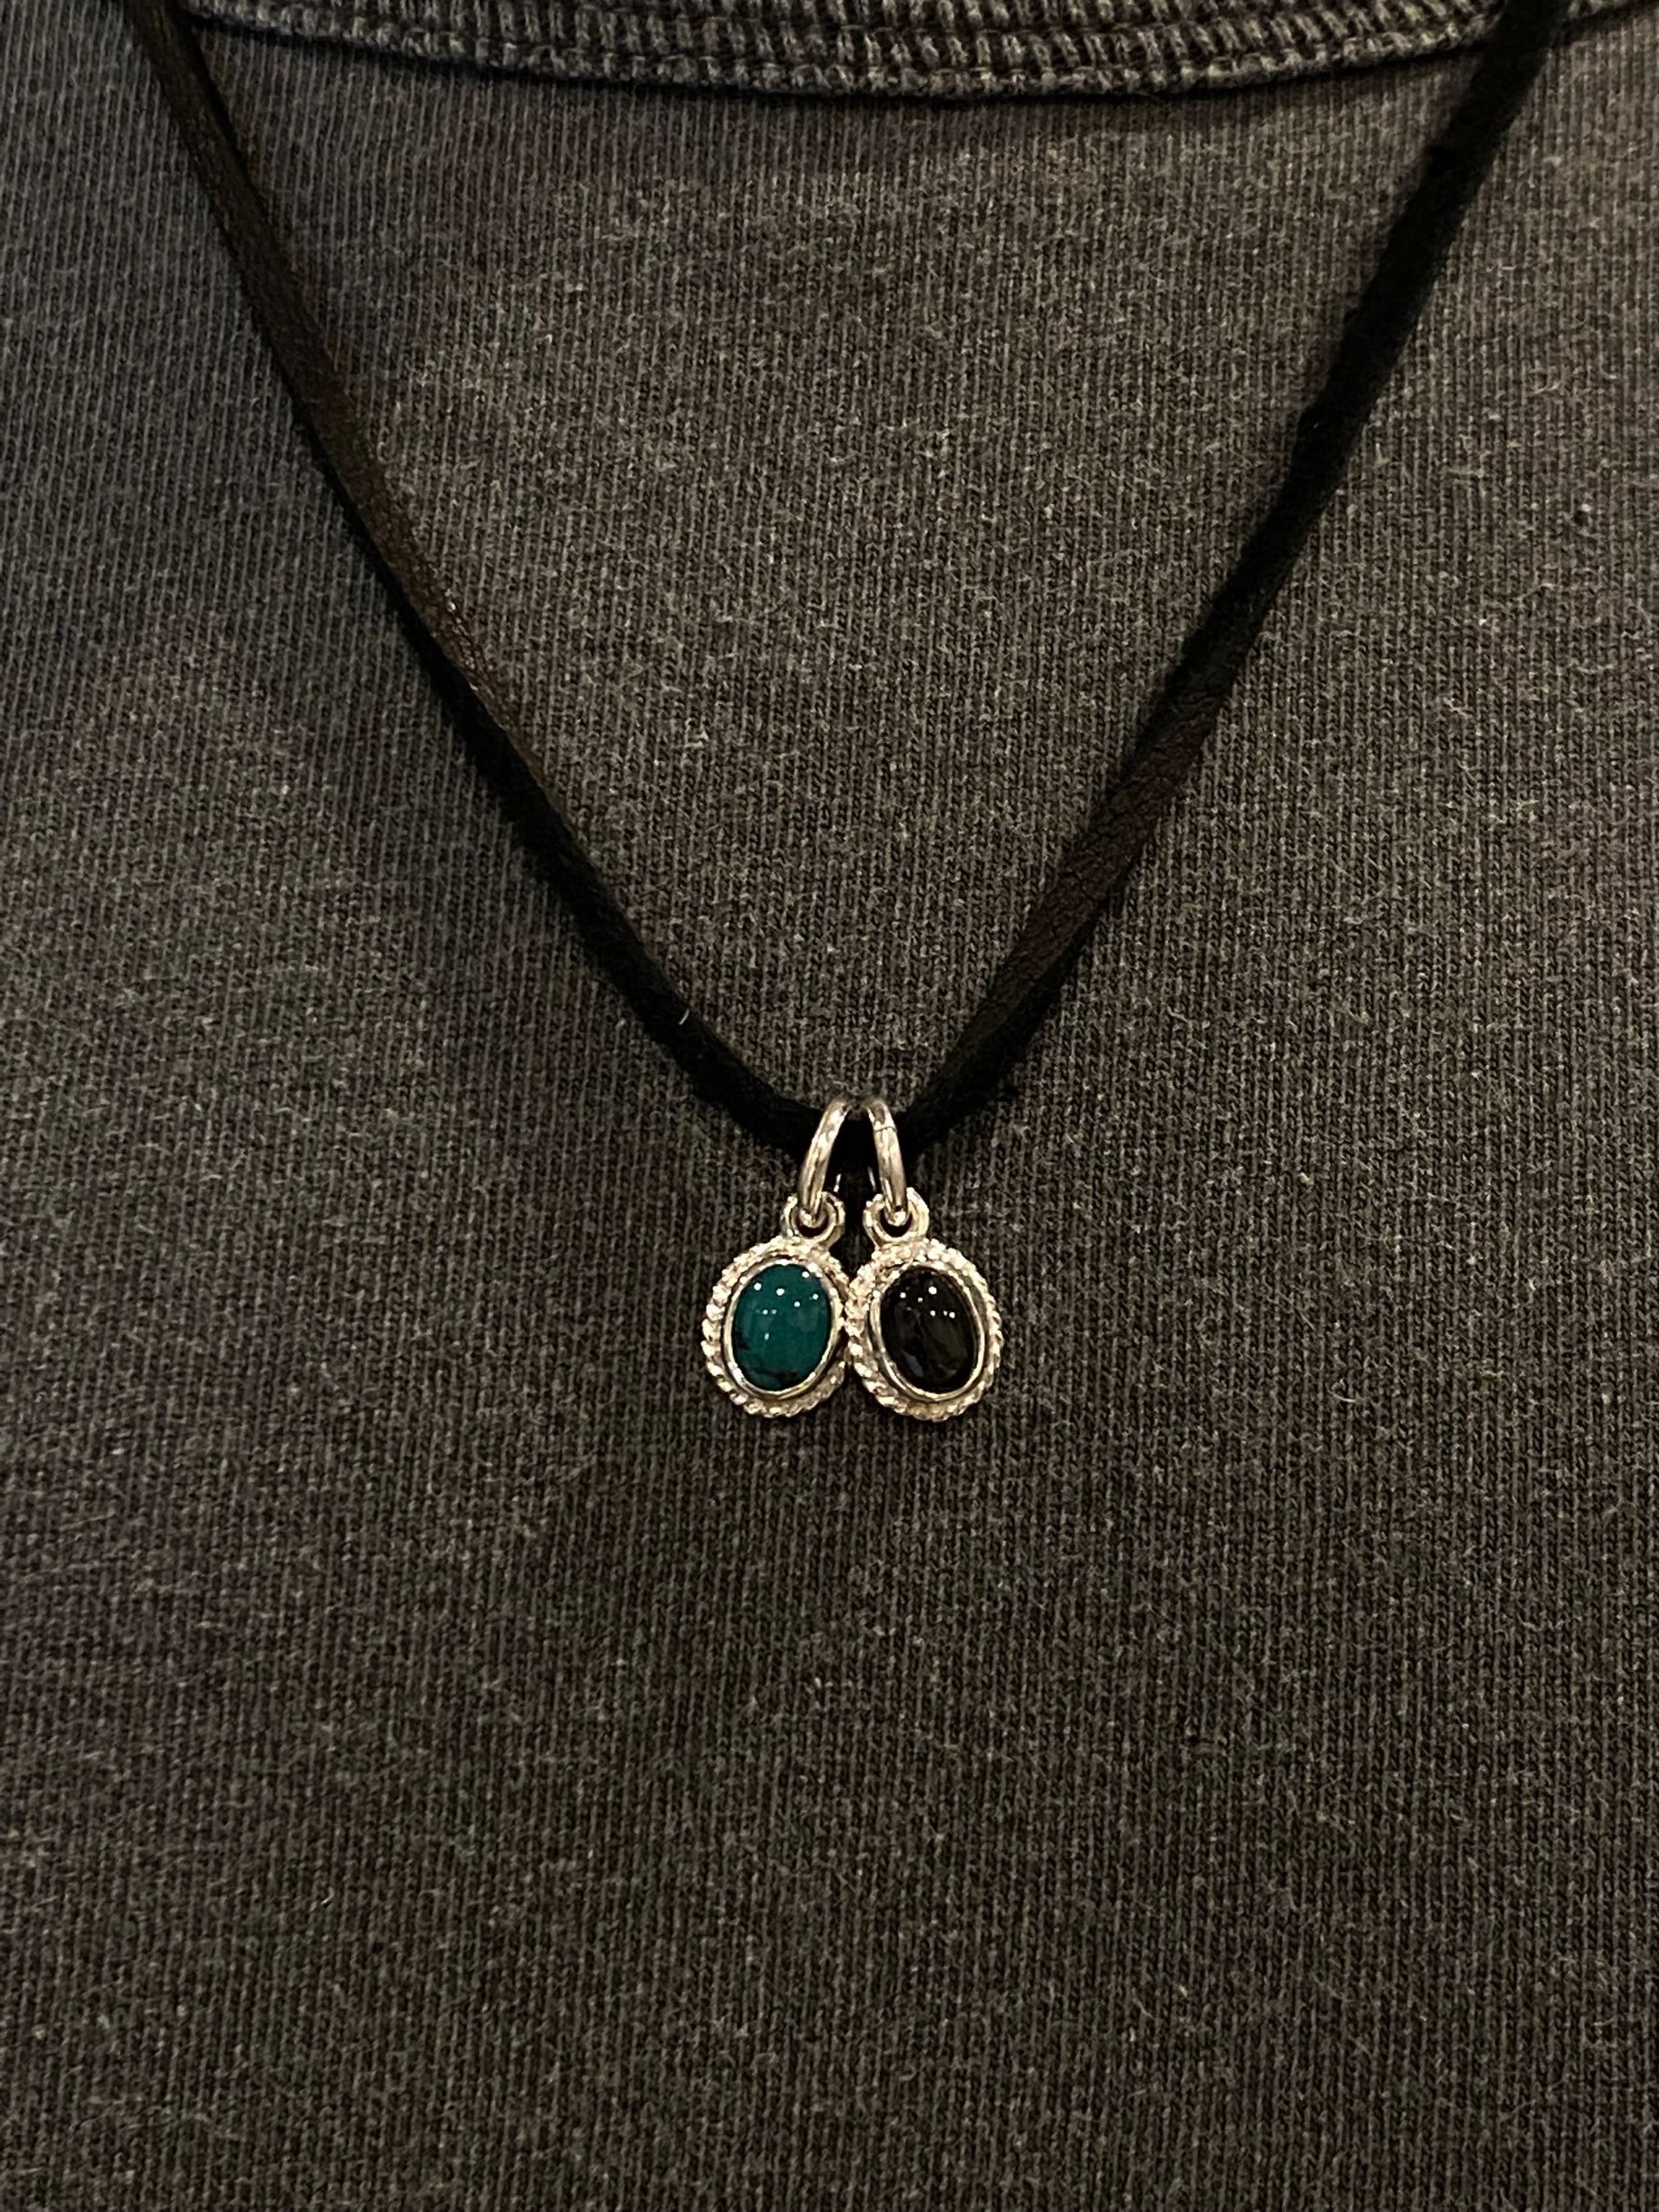 First Arrow's Size Small Mini Oval Pendant With Turquoise (P-297)